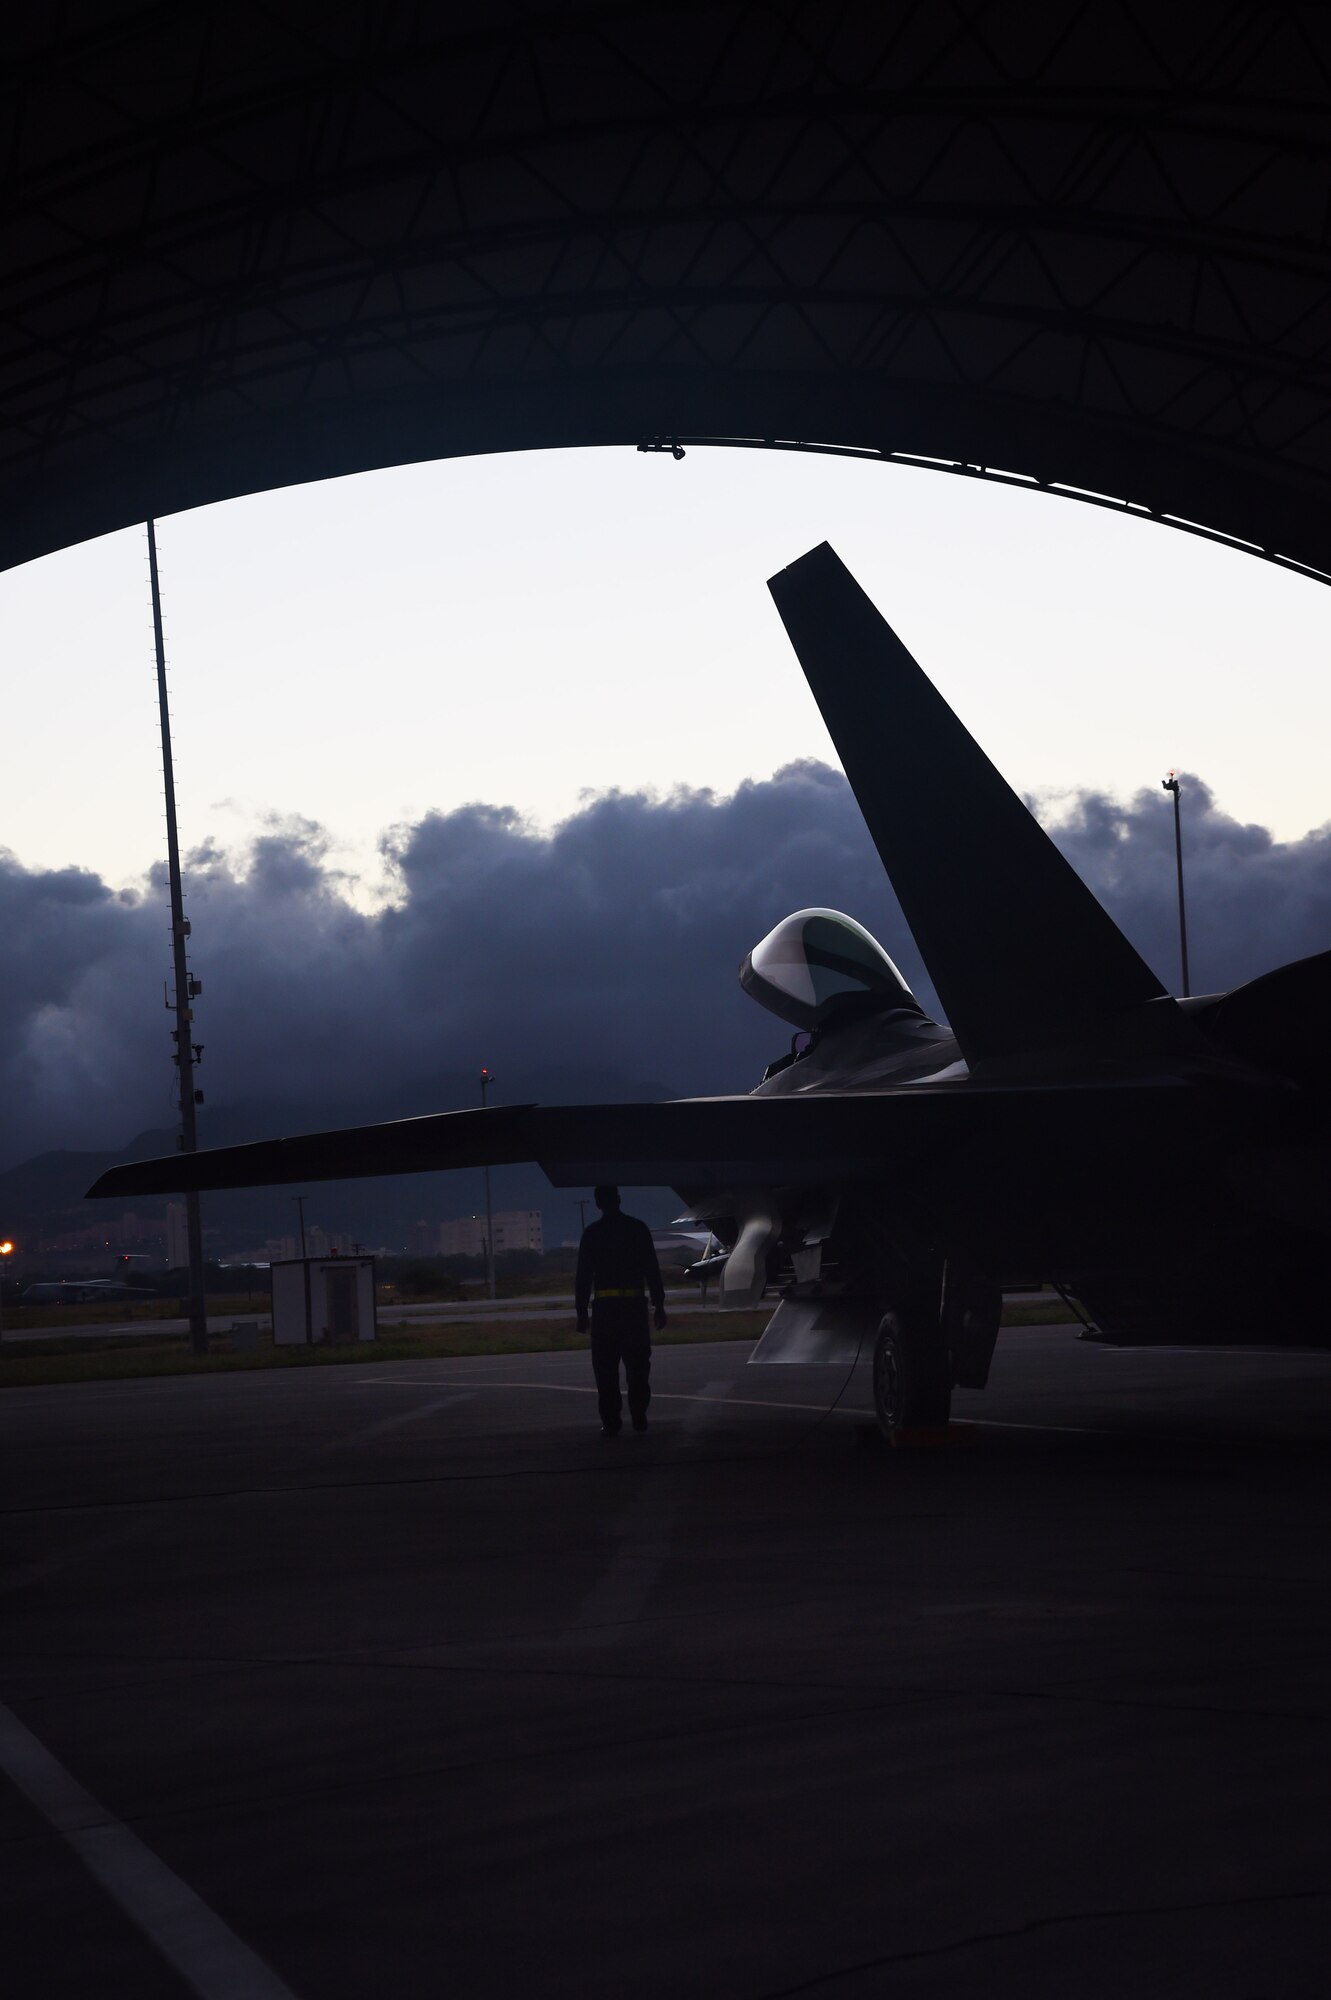 Tech. Sgt. Matthew Molnar, 154th Maintenance Squadron, inspects an F-22 Raptor from the 199th Fighter Squadron on Joint Base Pearl Harbor-Hickam, Hawaii, June 6, 2015. Pilots of the F-22 from the Hawaii Air National Guard’s 199th Fighter Squadron and the 19th Fighter Squadron teamed up with maintenance Airmen from the 154th Wing and 15th Maintenance Group to launch and recover a record 62 Raptors in a day.(U.S. Air Force photo by Tech. Sgt. Aaron Oelrich/Released)   